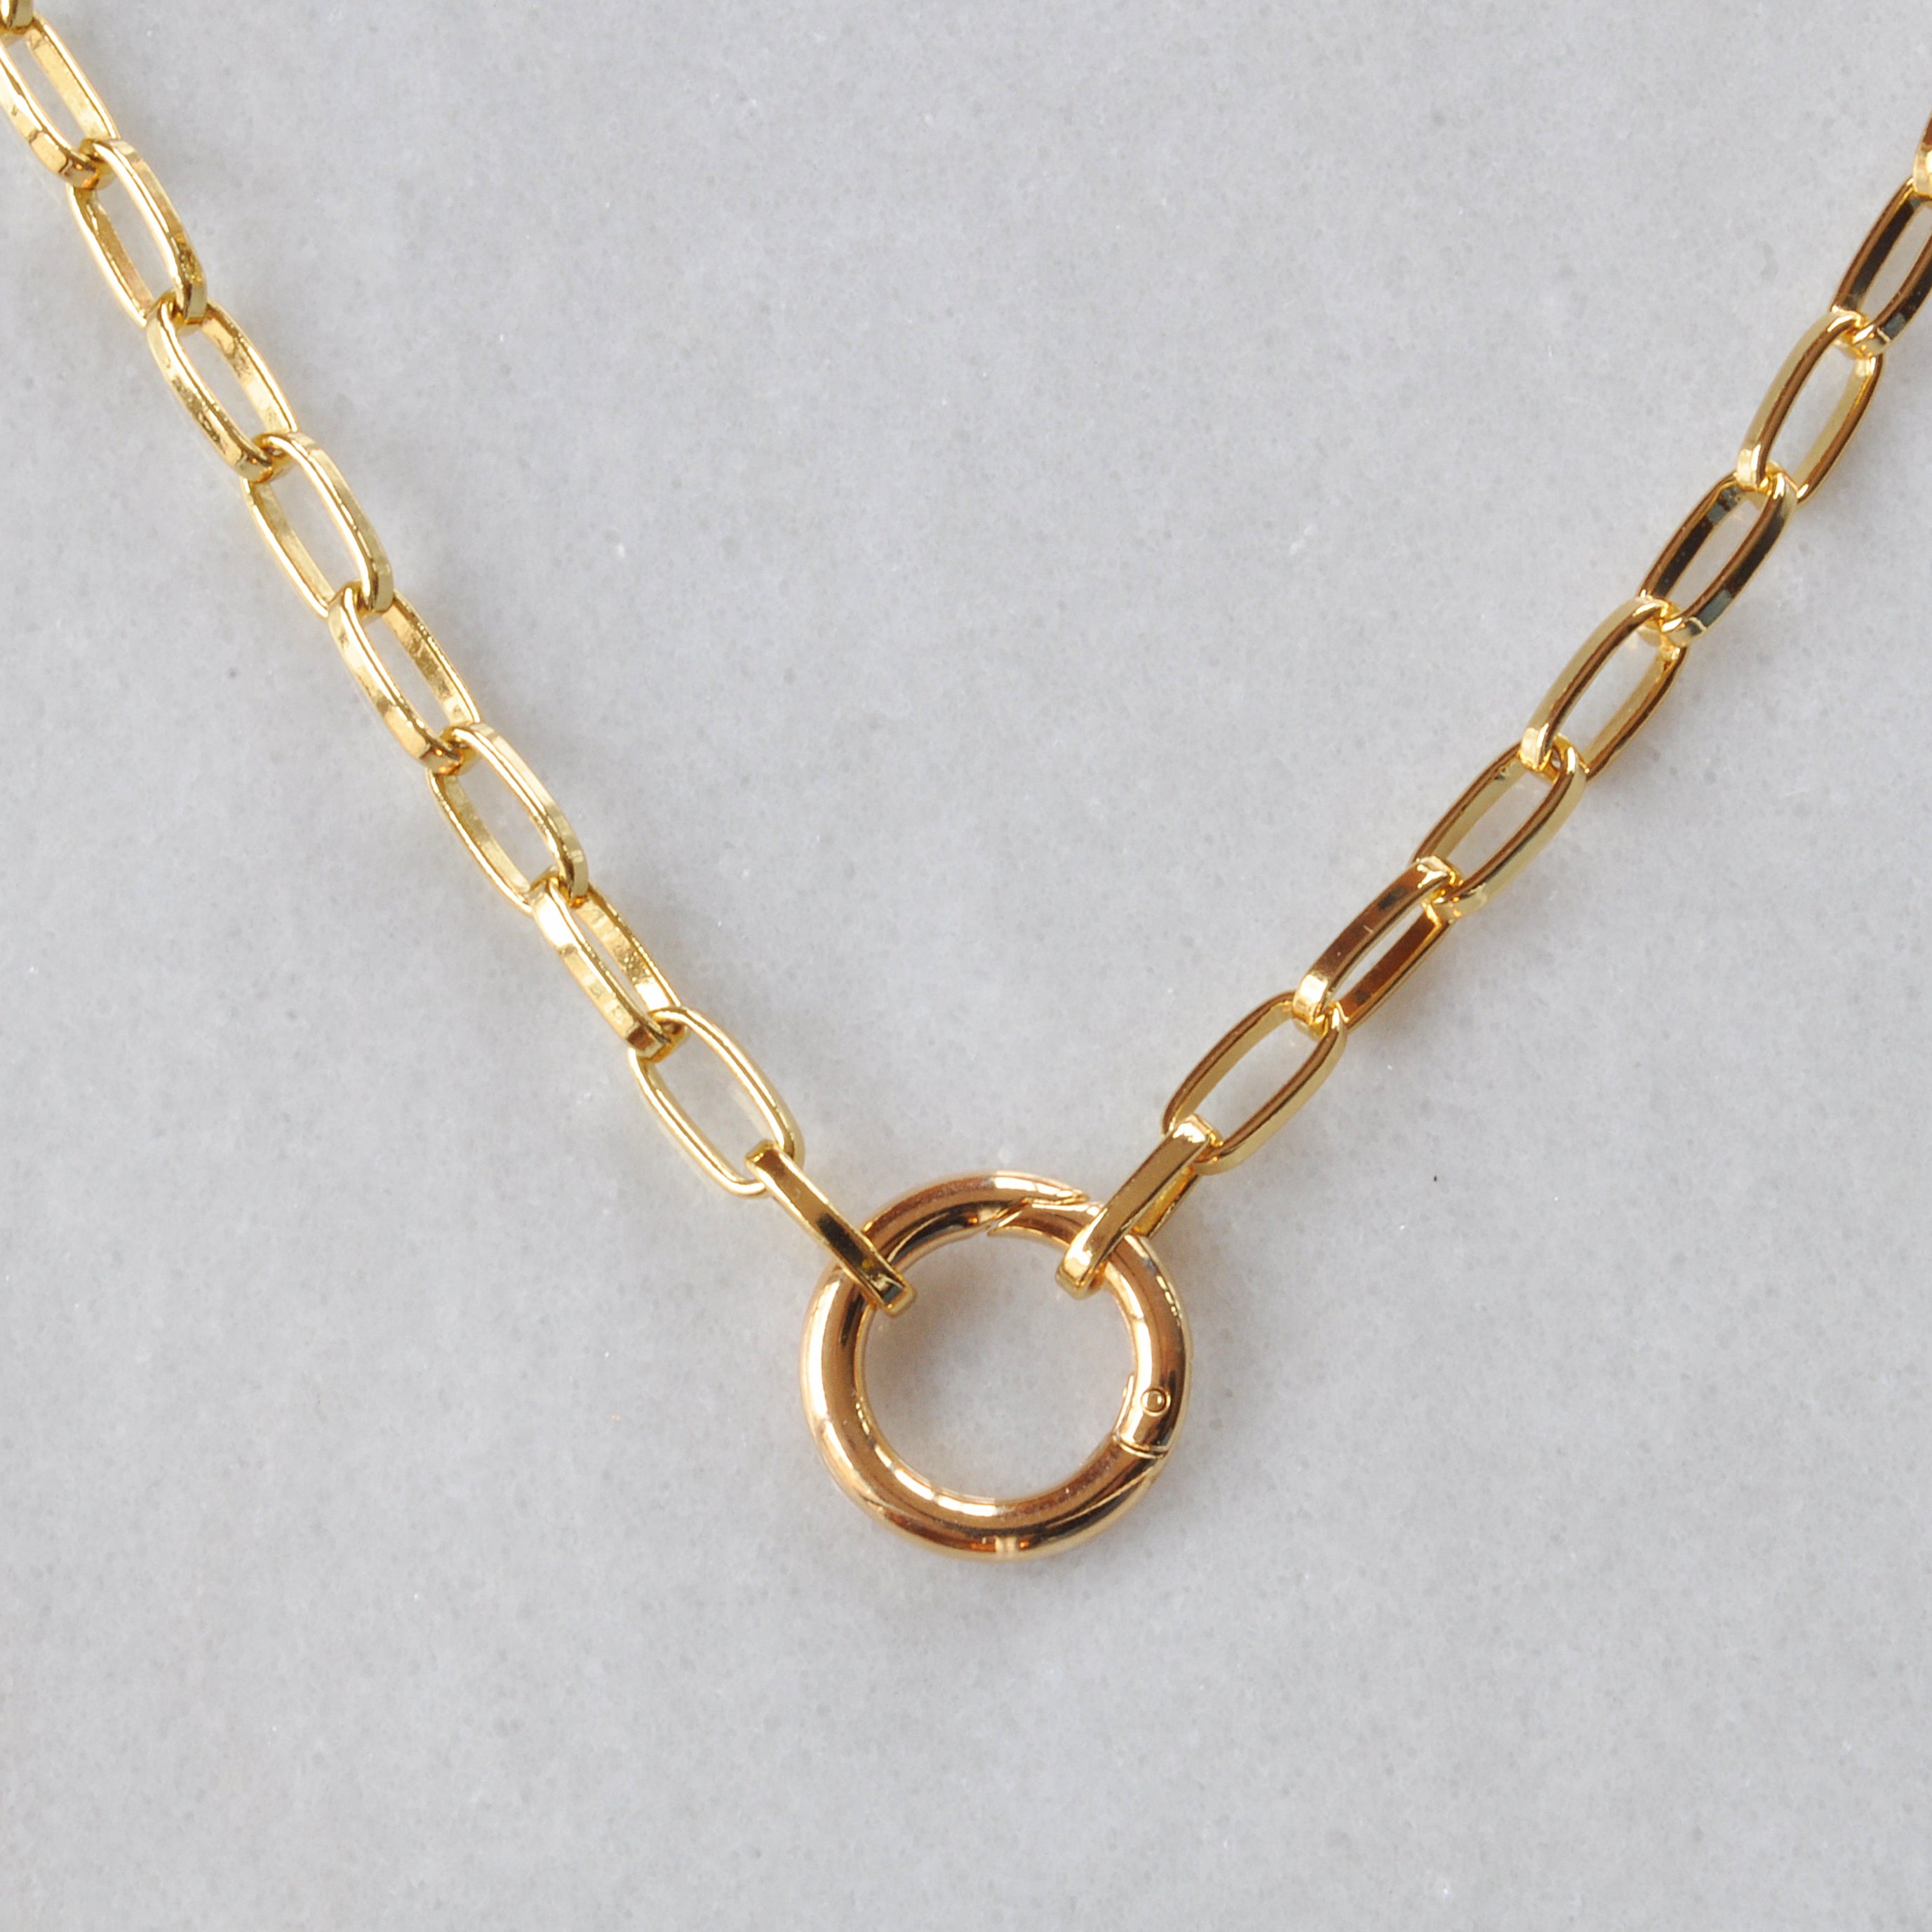 Gold Clasp, Necklace Clasp